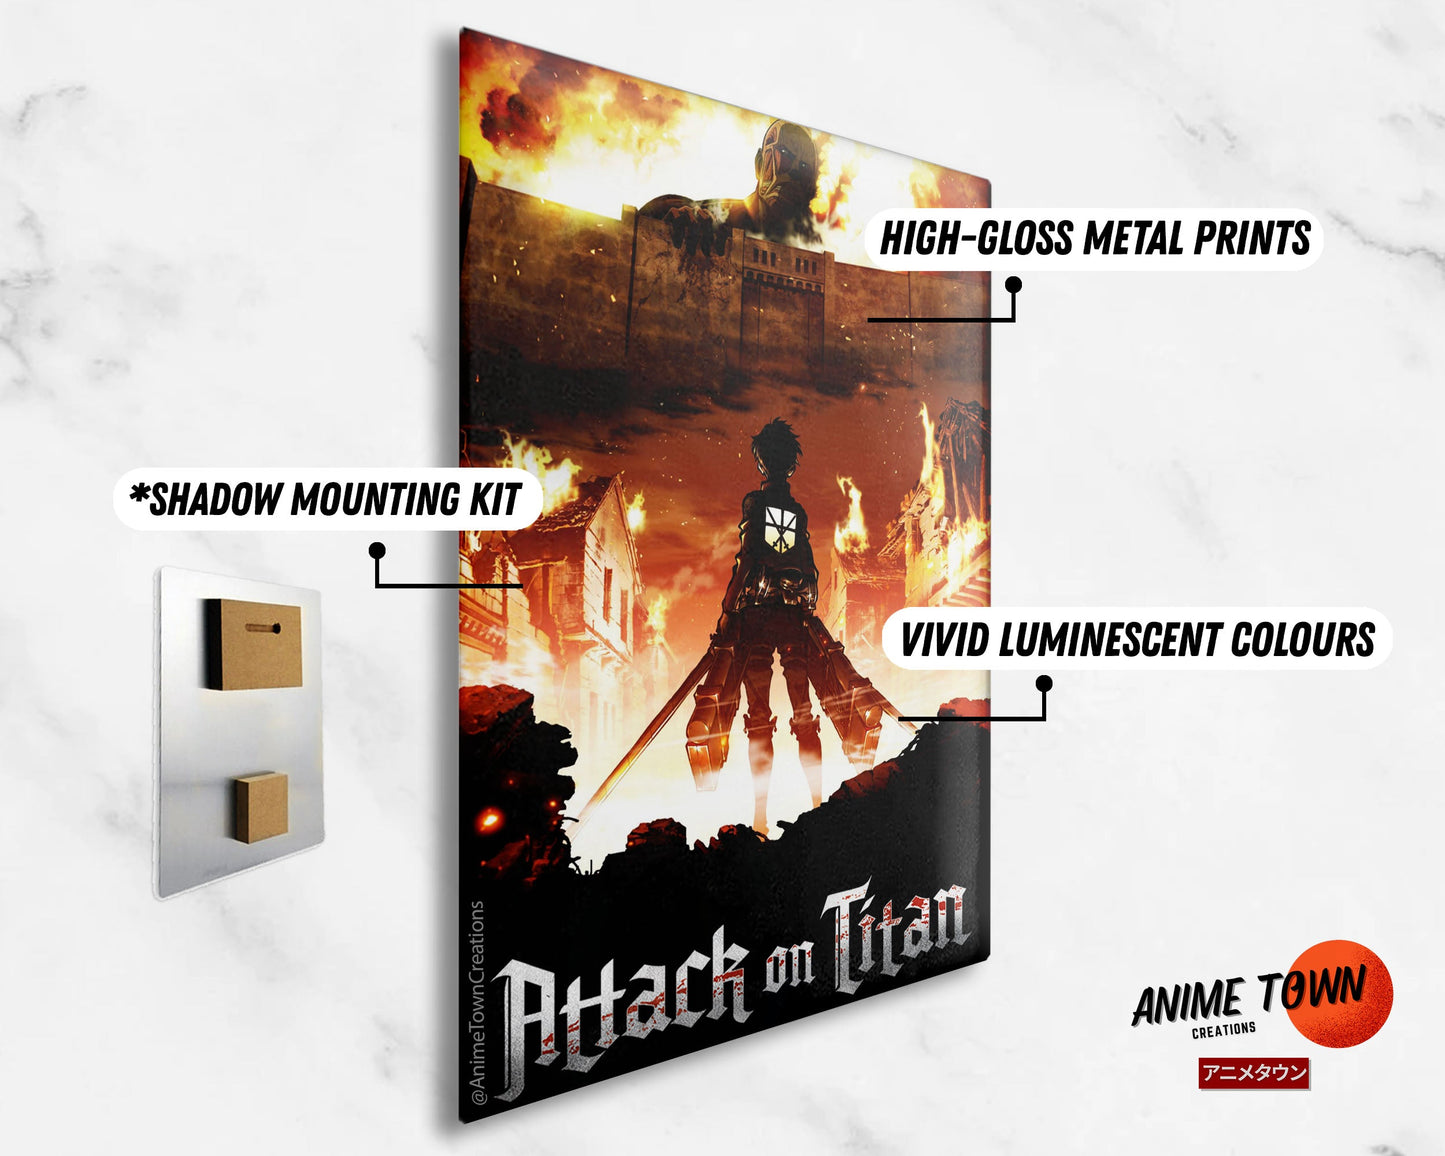 Anime Town Creations Metal Poster Attack on Titan Wall 11" x 17" Home Goods - Anime Attack on Titan Metal Poster